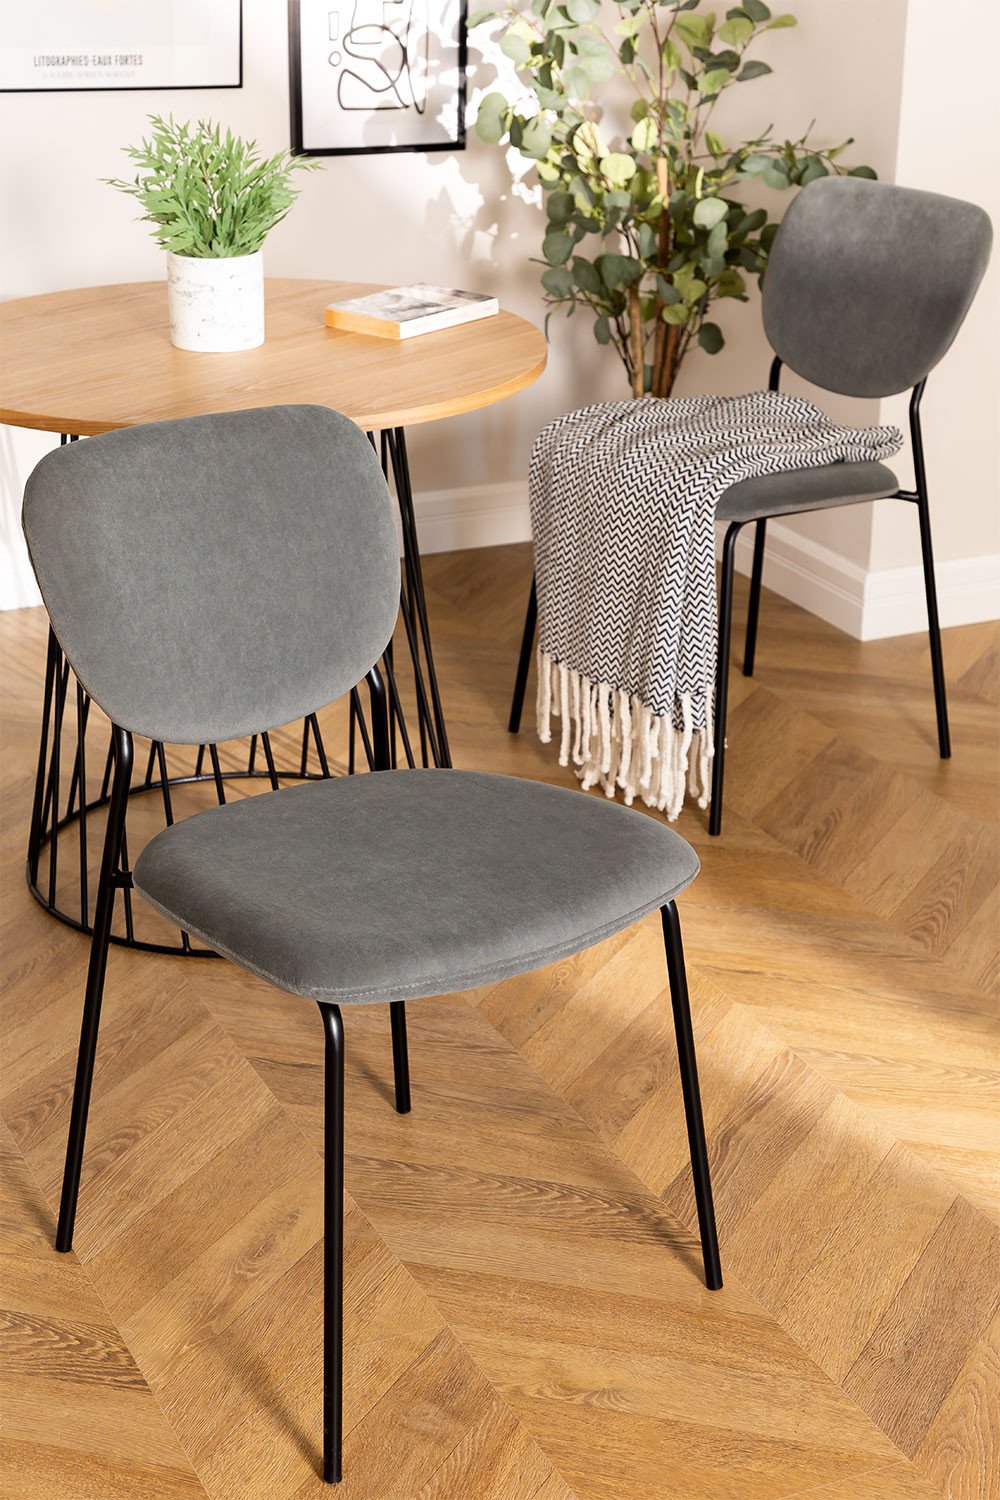 Velvet Upholstered Dining Chair Taris, Grey Hairpin Dining Chairs